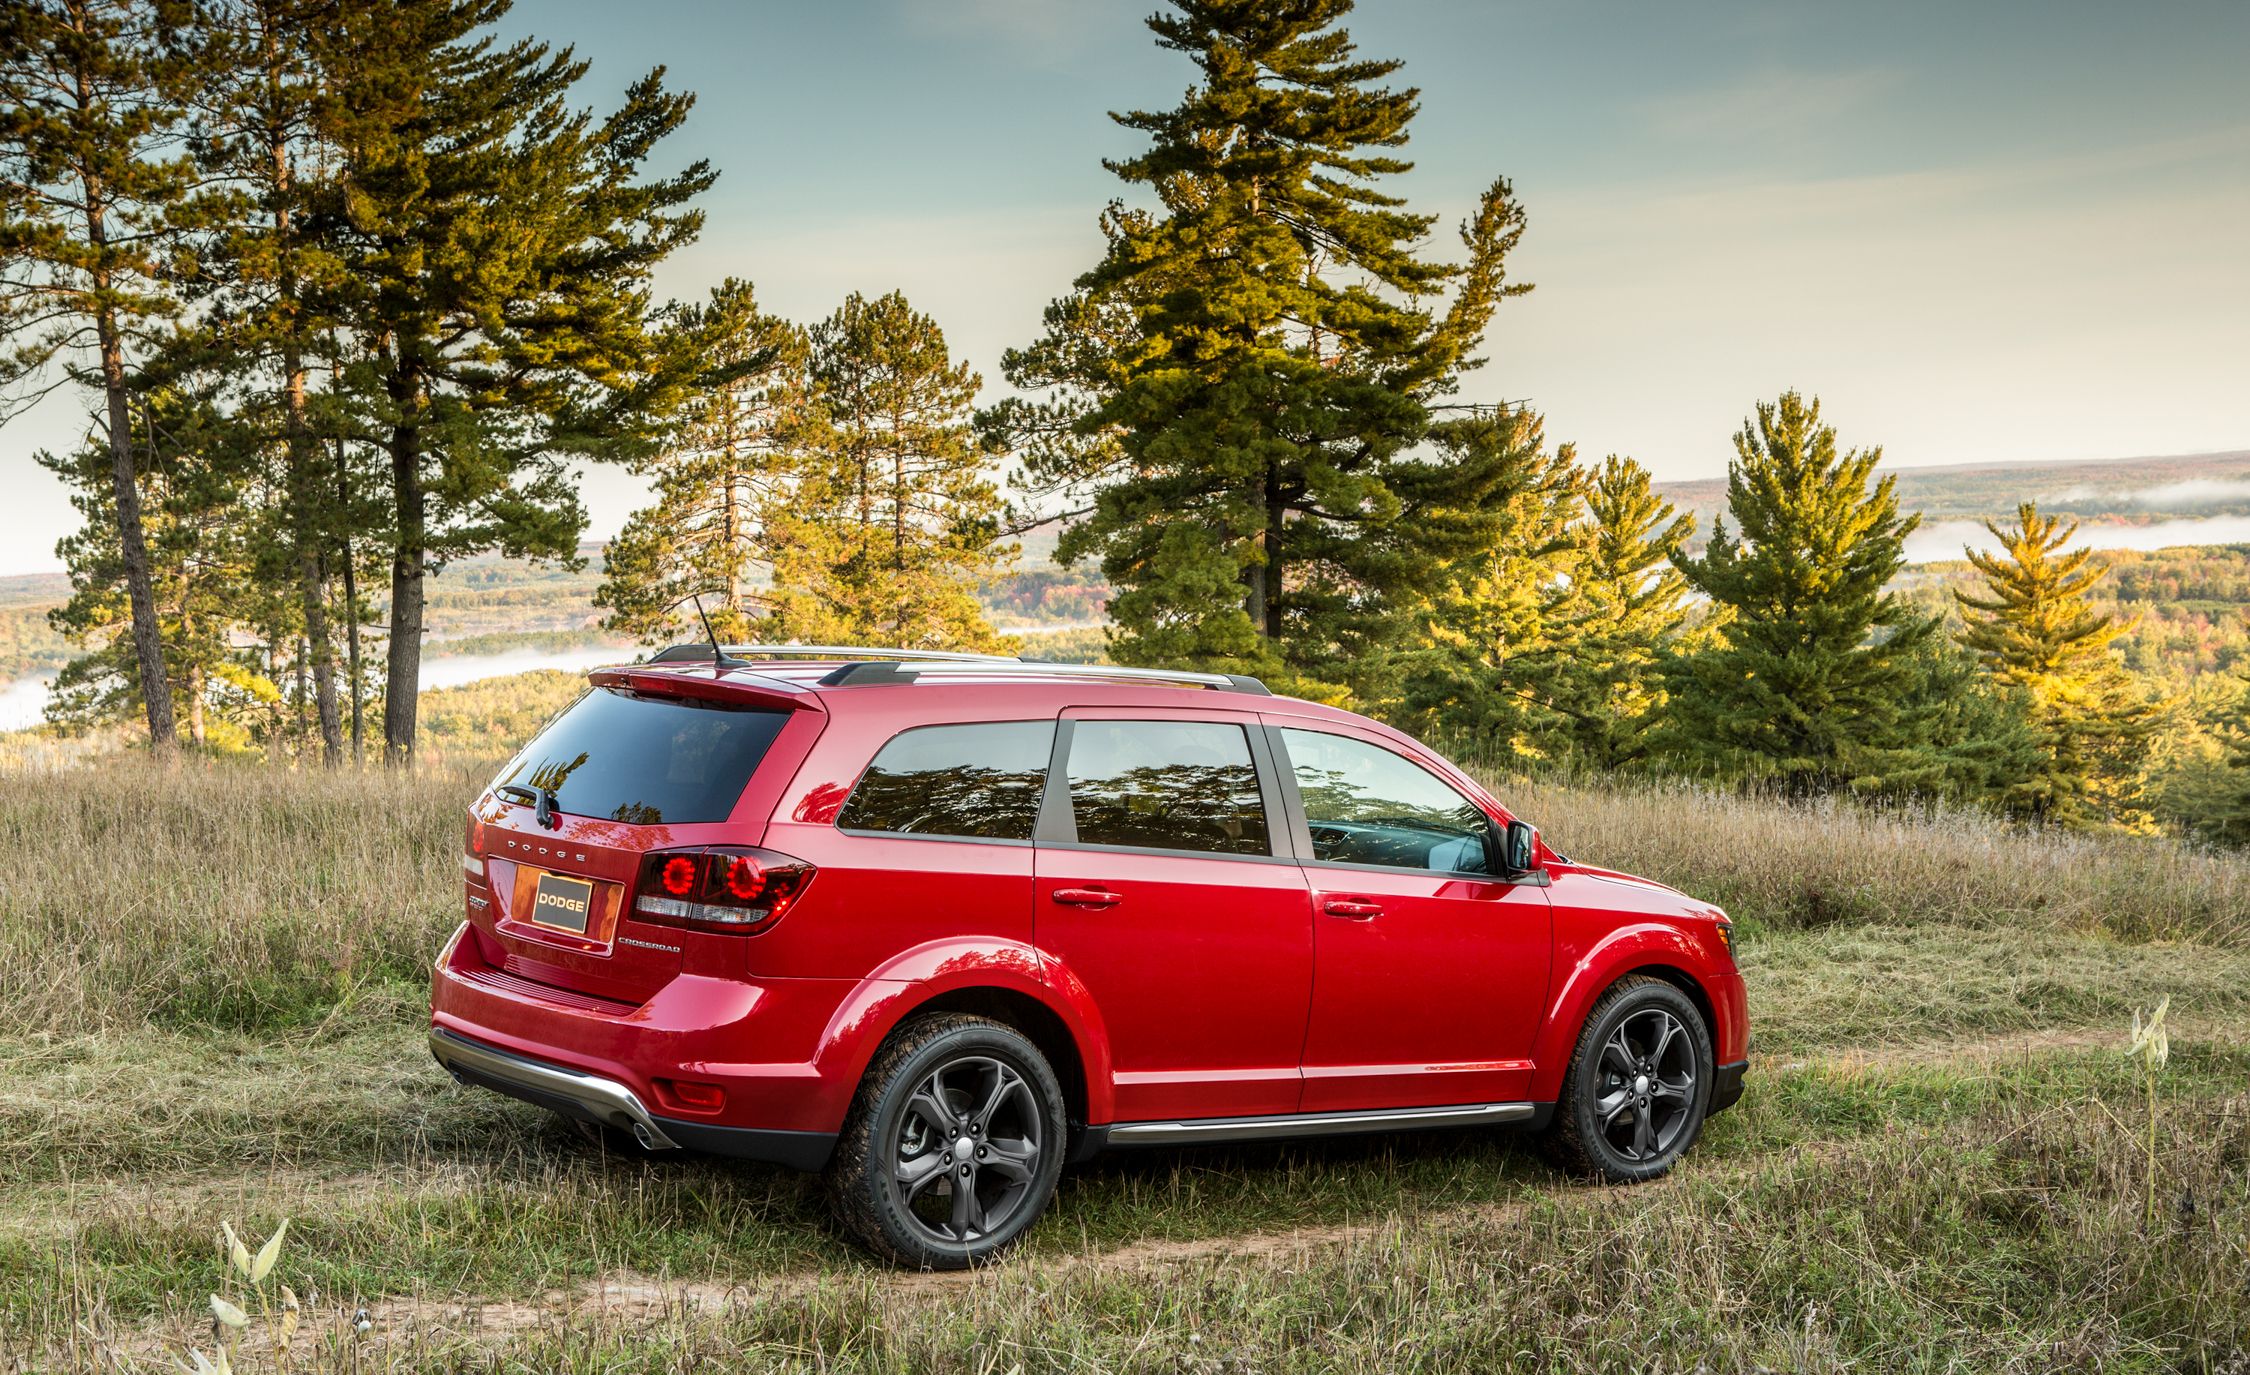 2018 Dodge Journey Cargo Space and Storage Review Car and Driver